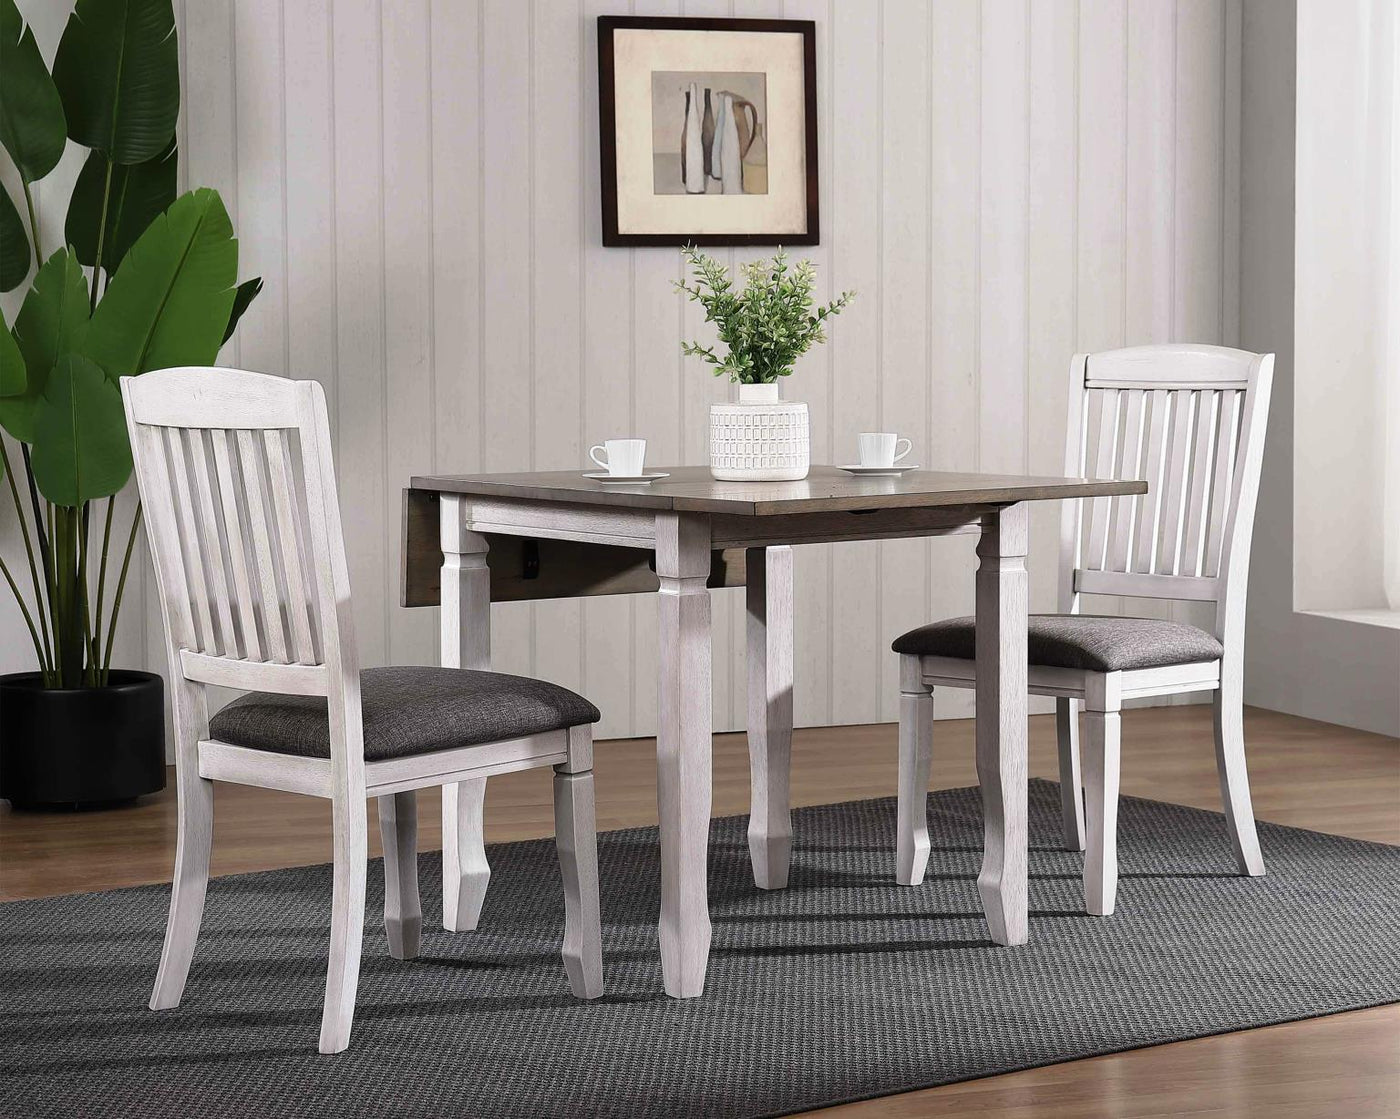 Lakeside 3-Pieces Indoor Dining Set